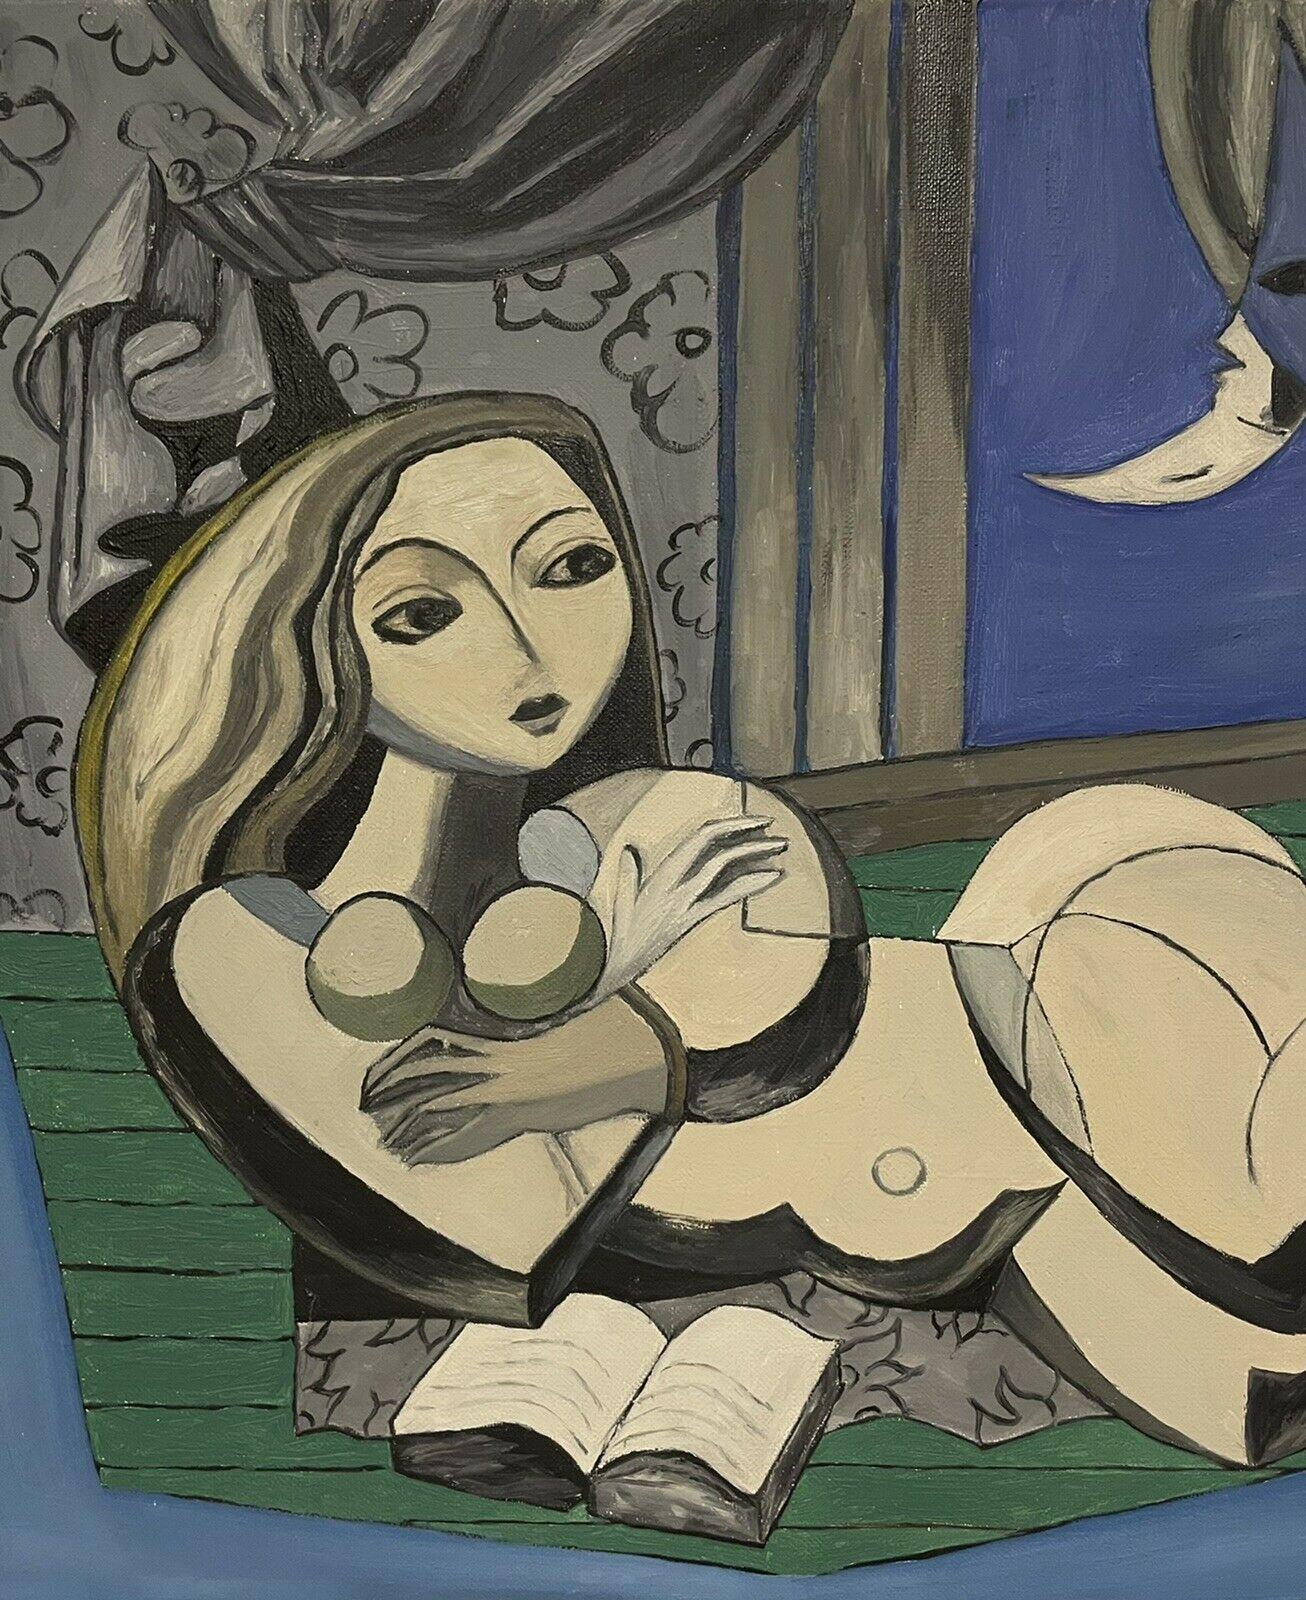 Artist/ School: French School, late 20th century

Title: The Nude Model, in the style of Picasso

Medium: oil painting on canvas, framed

framed: 22.25 x 26.75 inches
canvas:  19.75 x 24 inches 

Provenance: private collection, France

Condition: